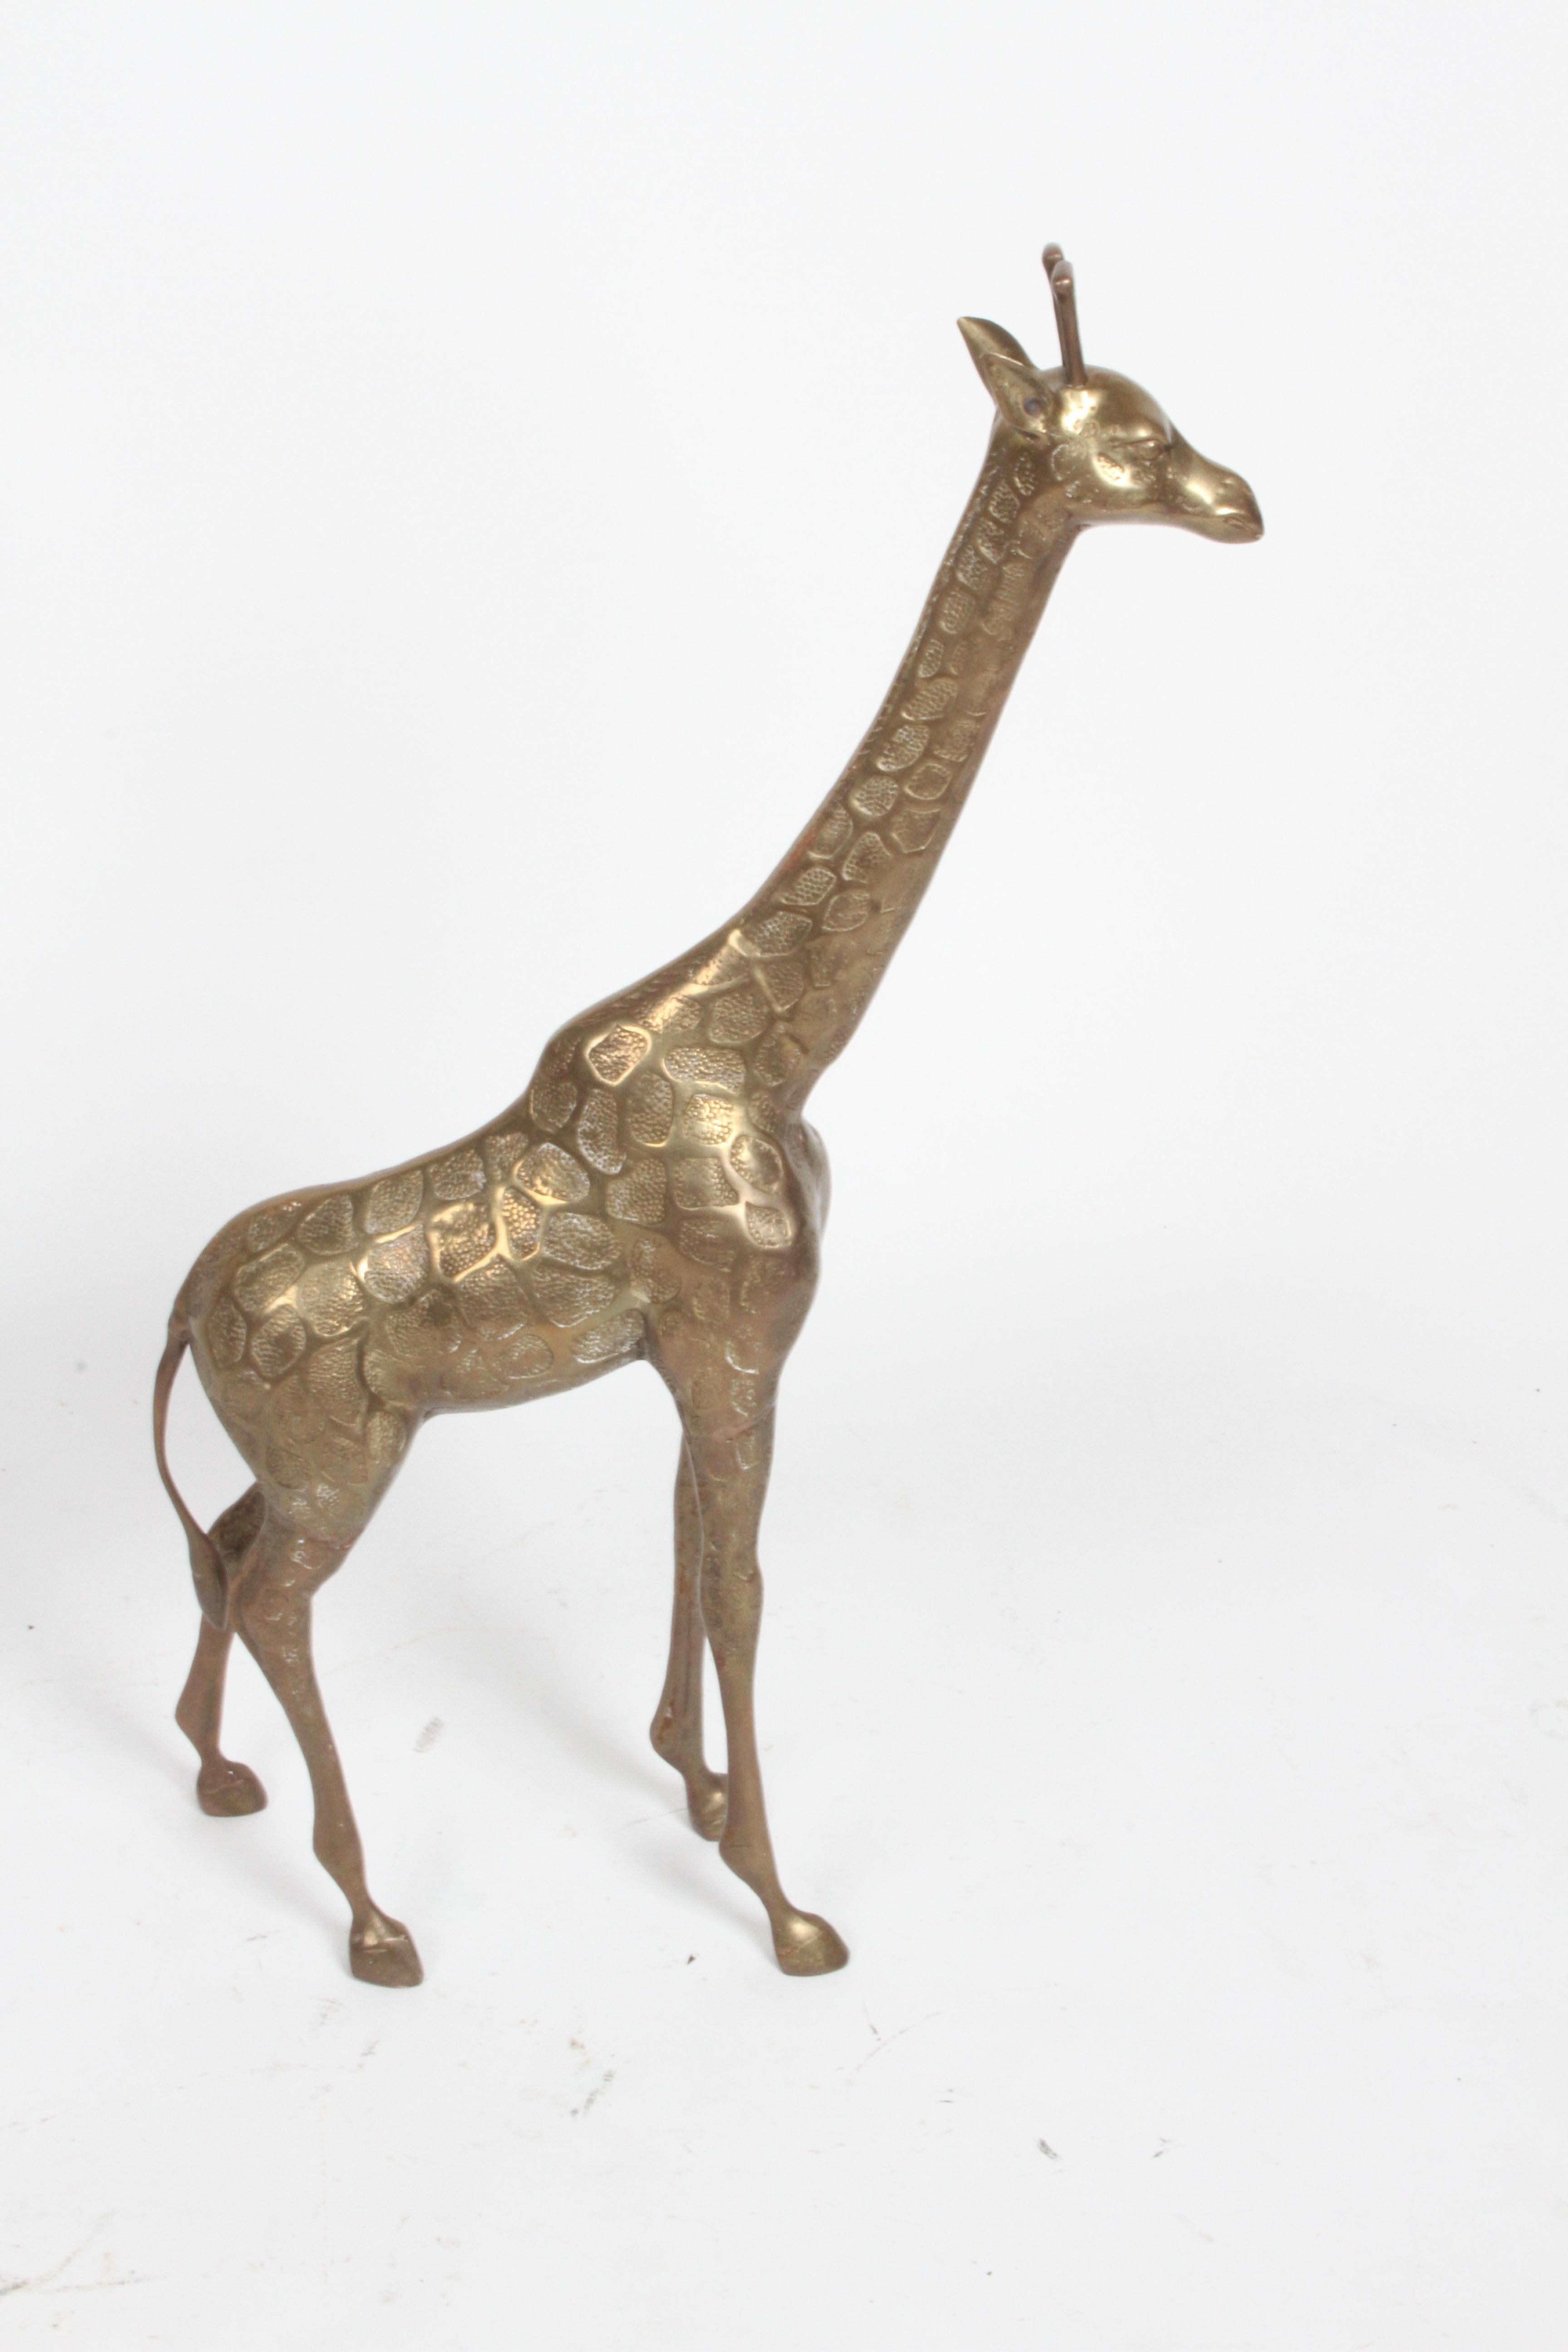 Hollywood Regency Style Brass Giraffe Floor Statue or Sculpture, circa 1970s For Sale 2